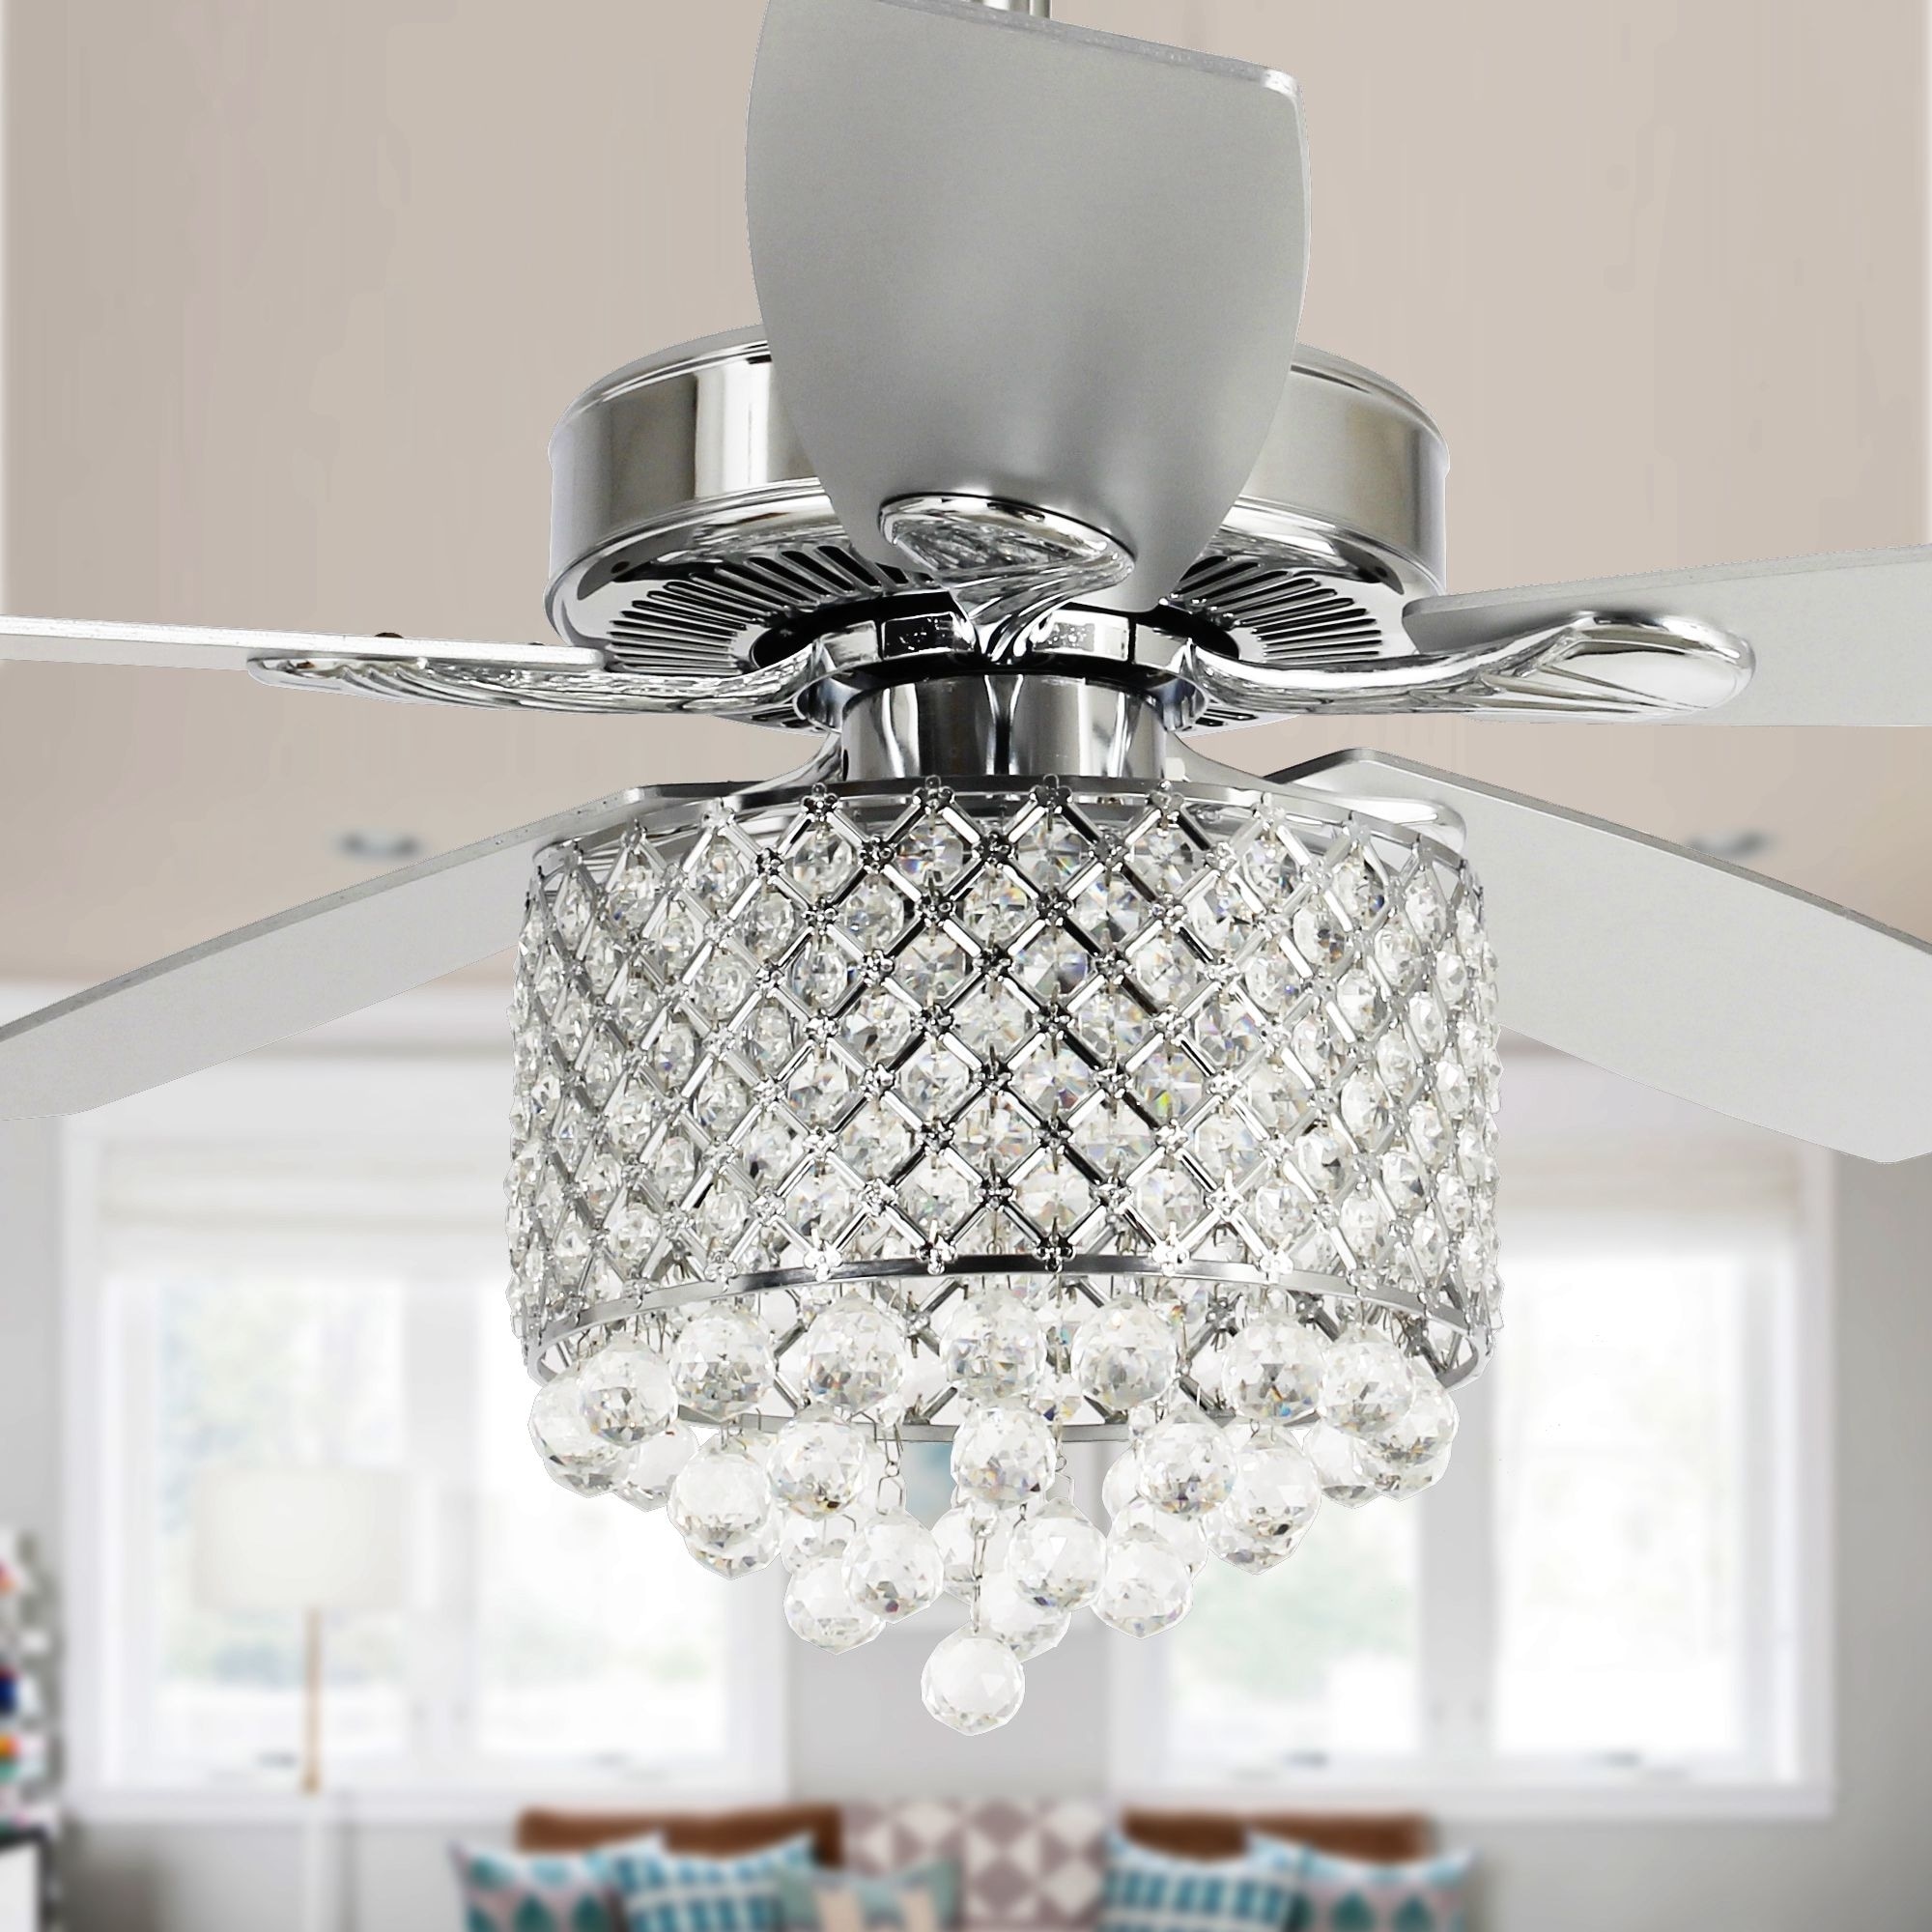 Details about   52" Crystal Ceiling Fan Light 5-Blade Living Room Home Chandelier+Remote Control 